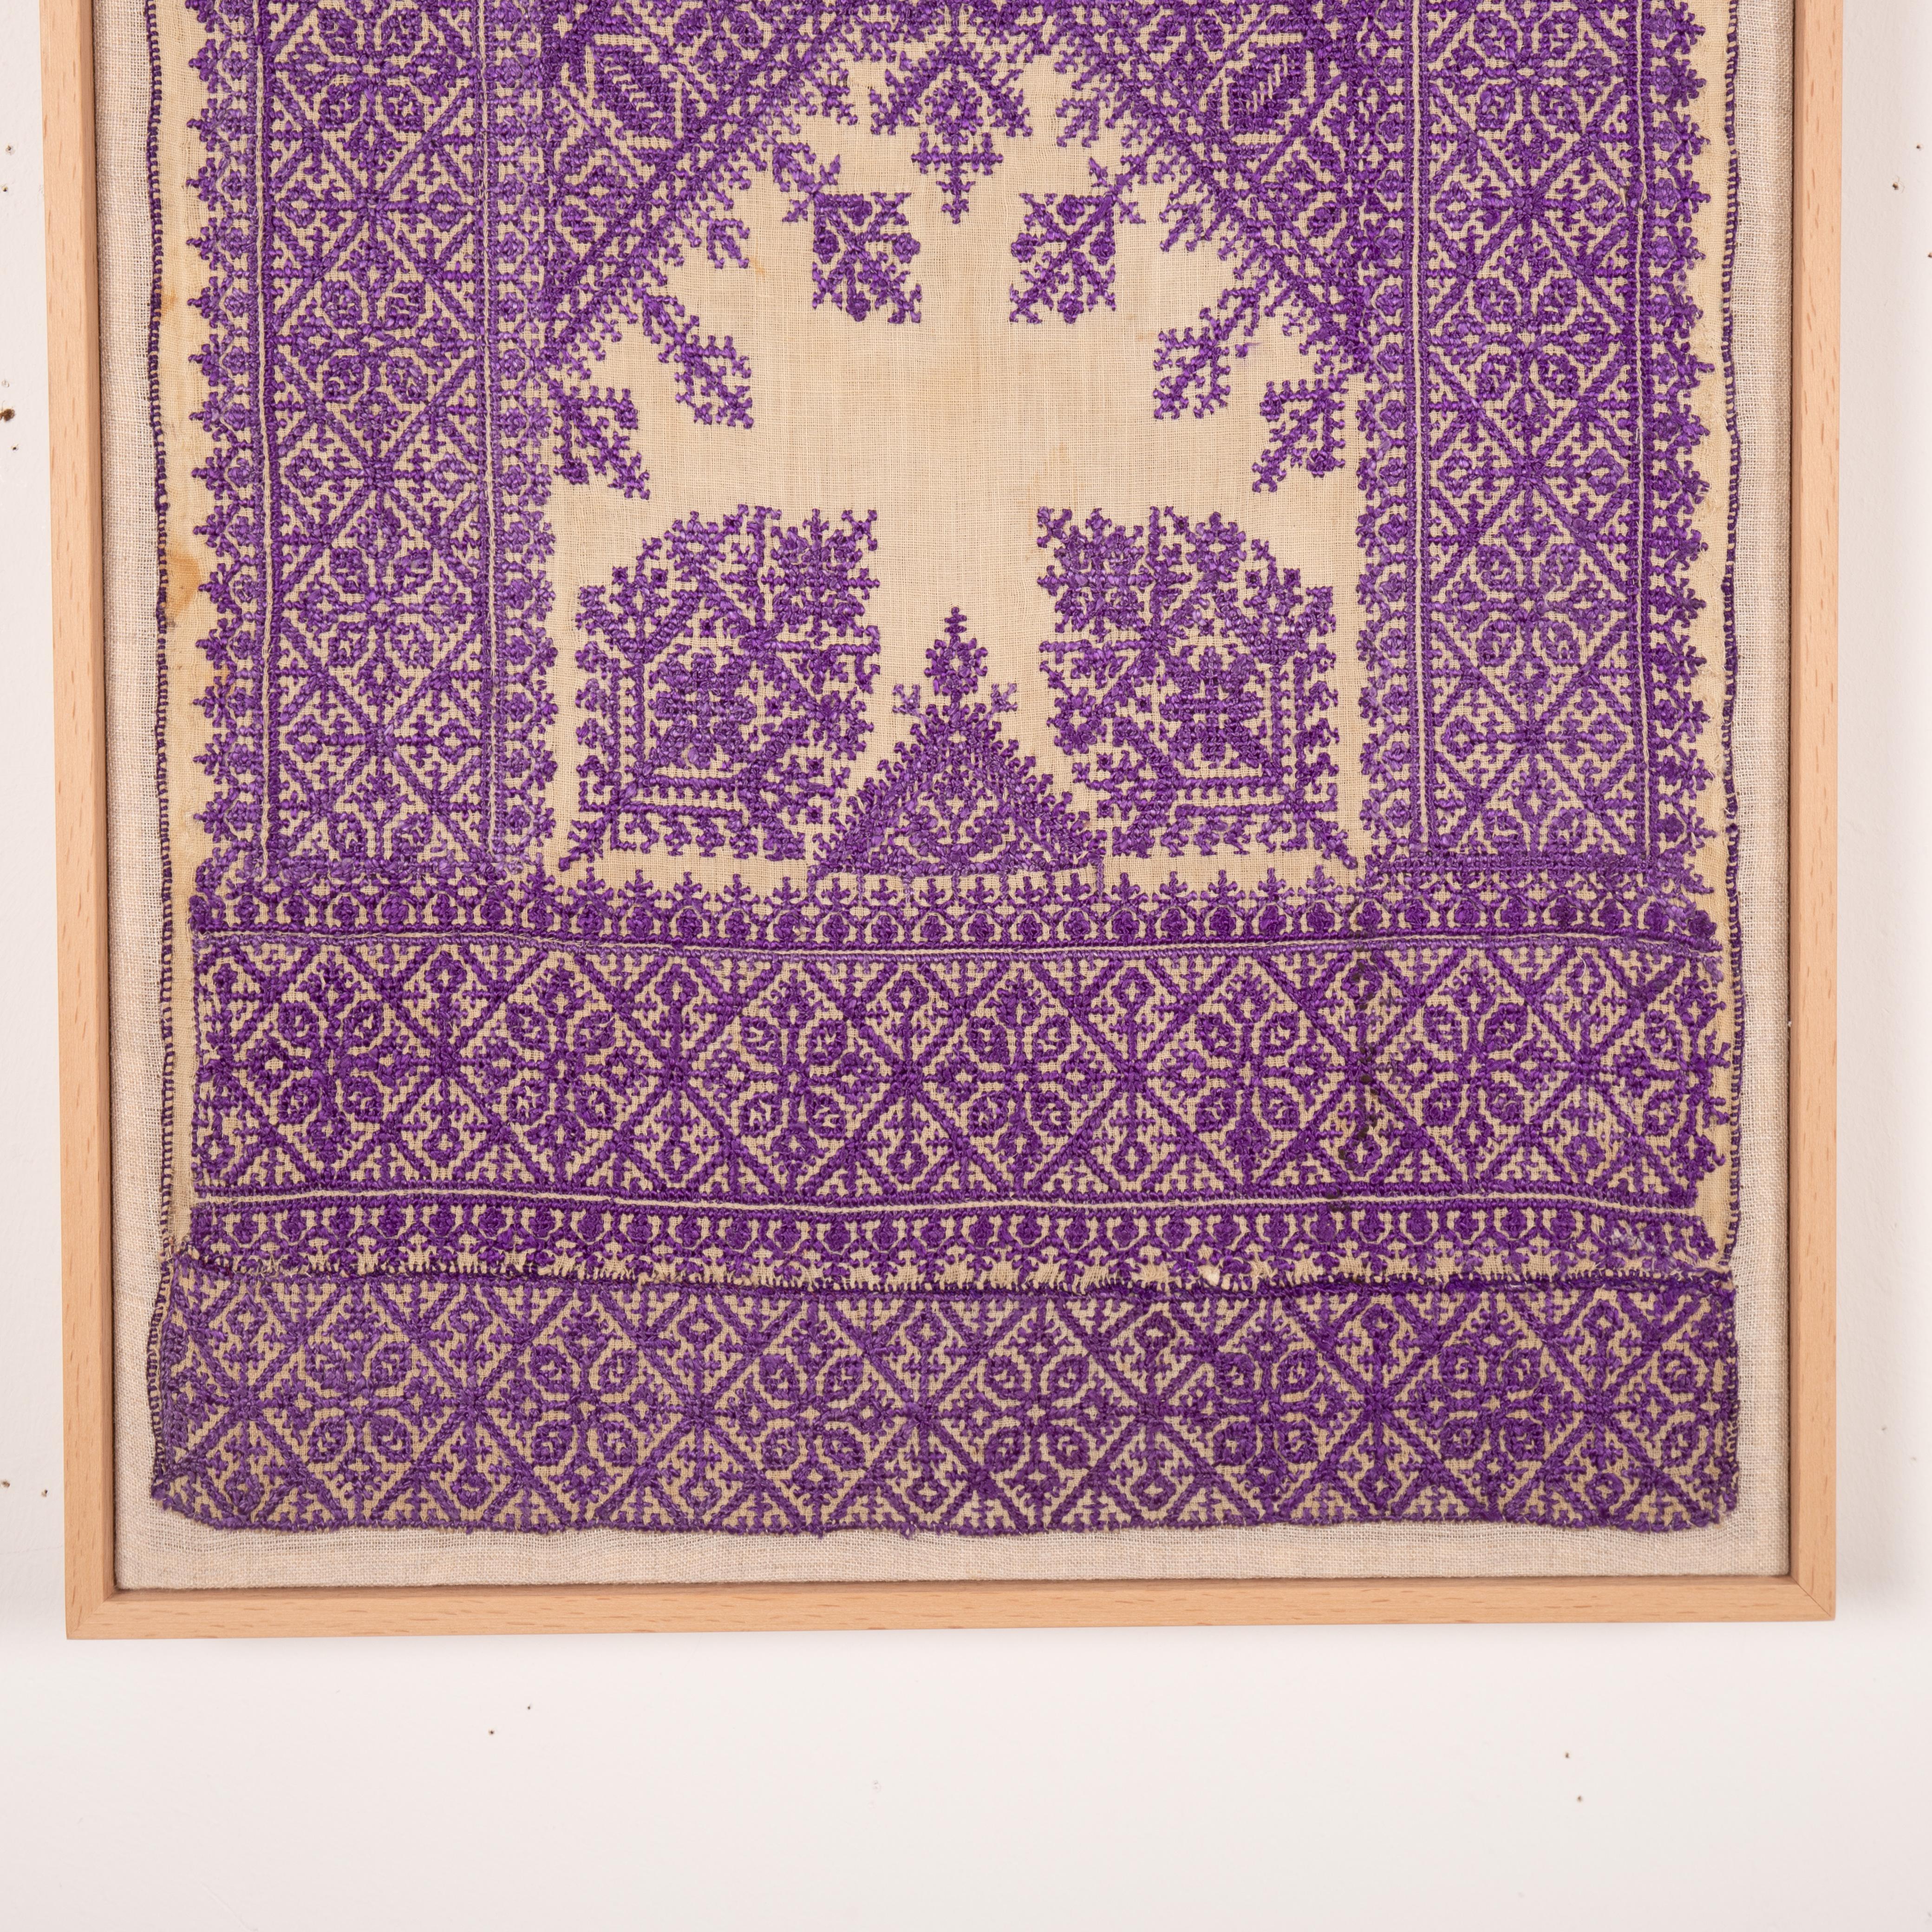 Islamic Framed, Antique Fez Embroidery Fragment, Early 20th Century